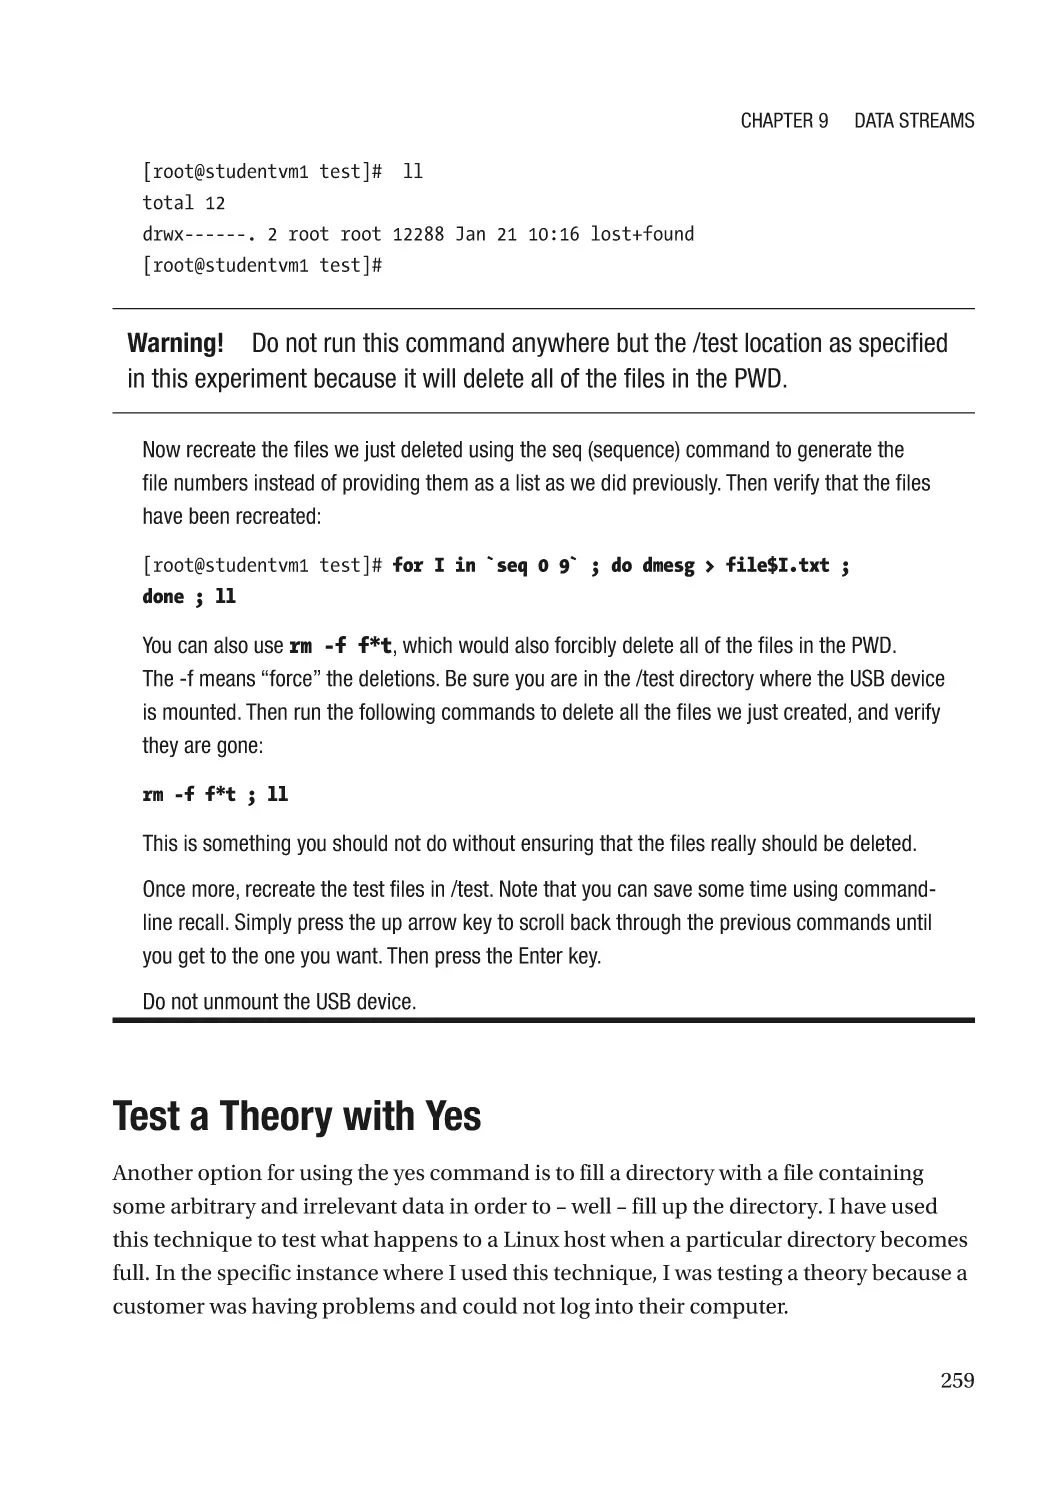 Test a Theory with Yes